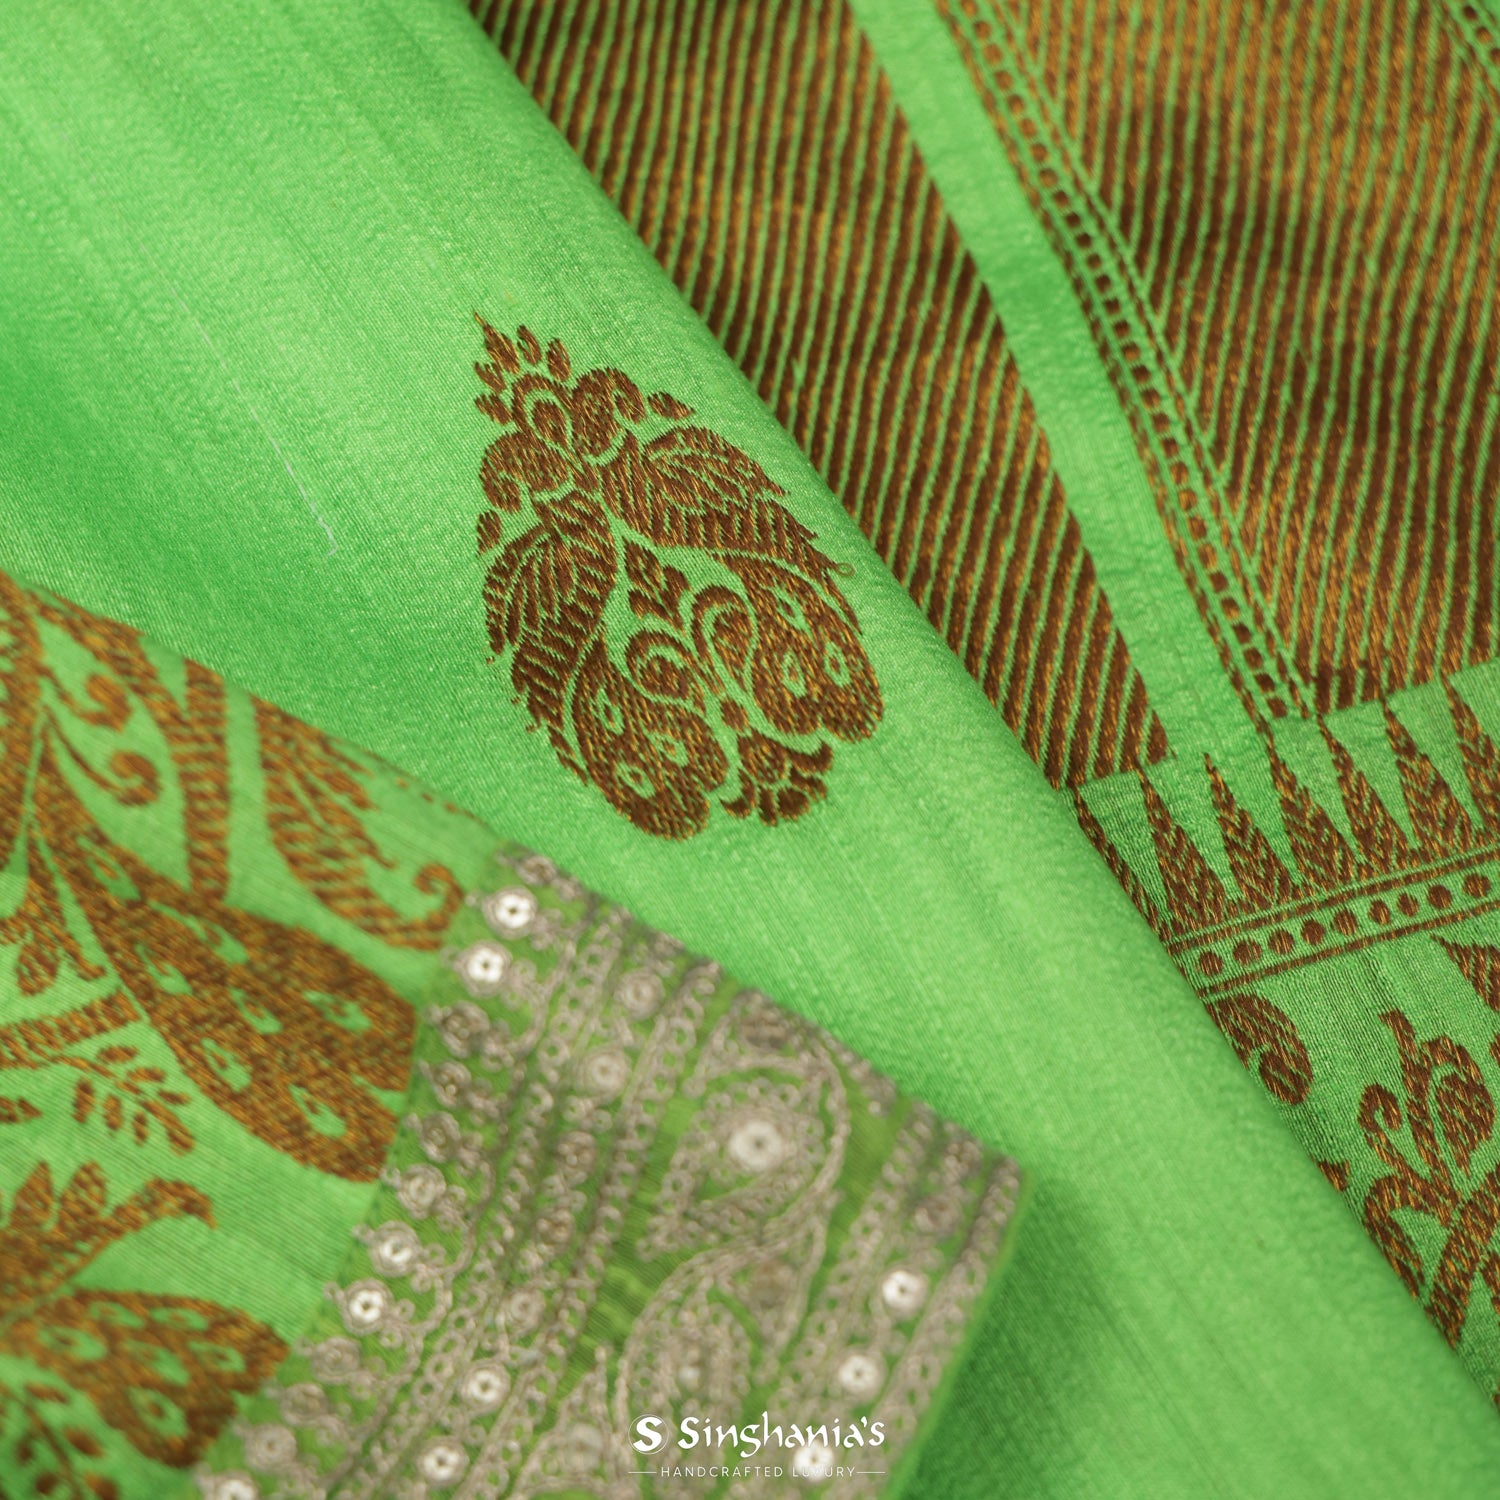 Neon Green Matka Saree With Floral Weaving